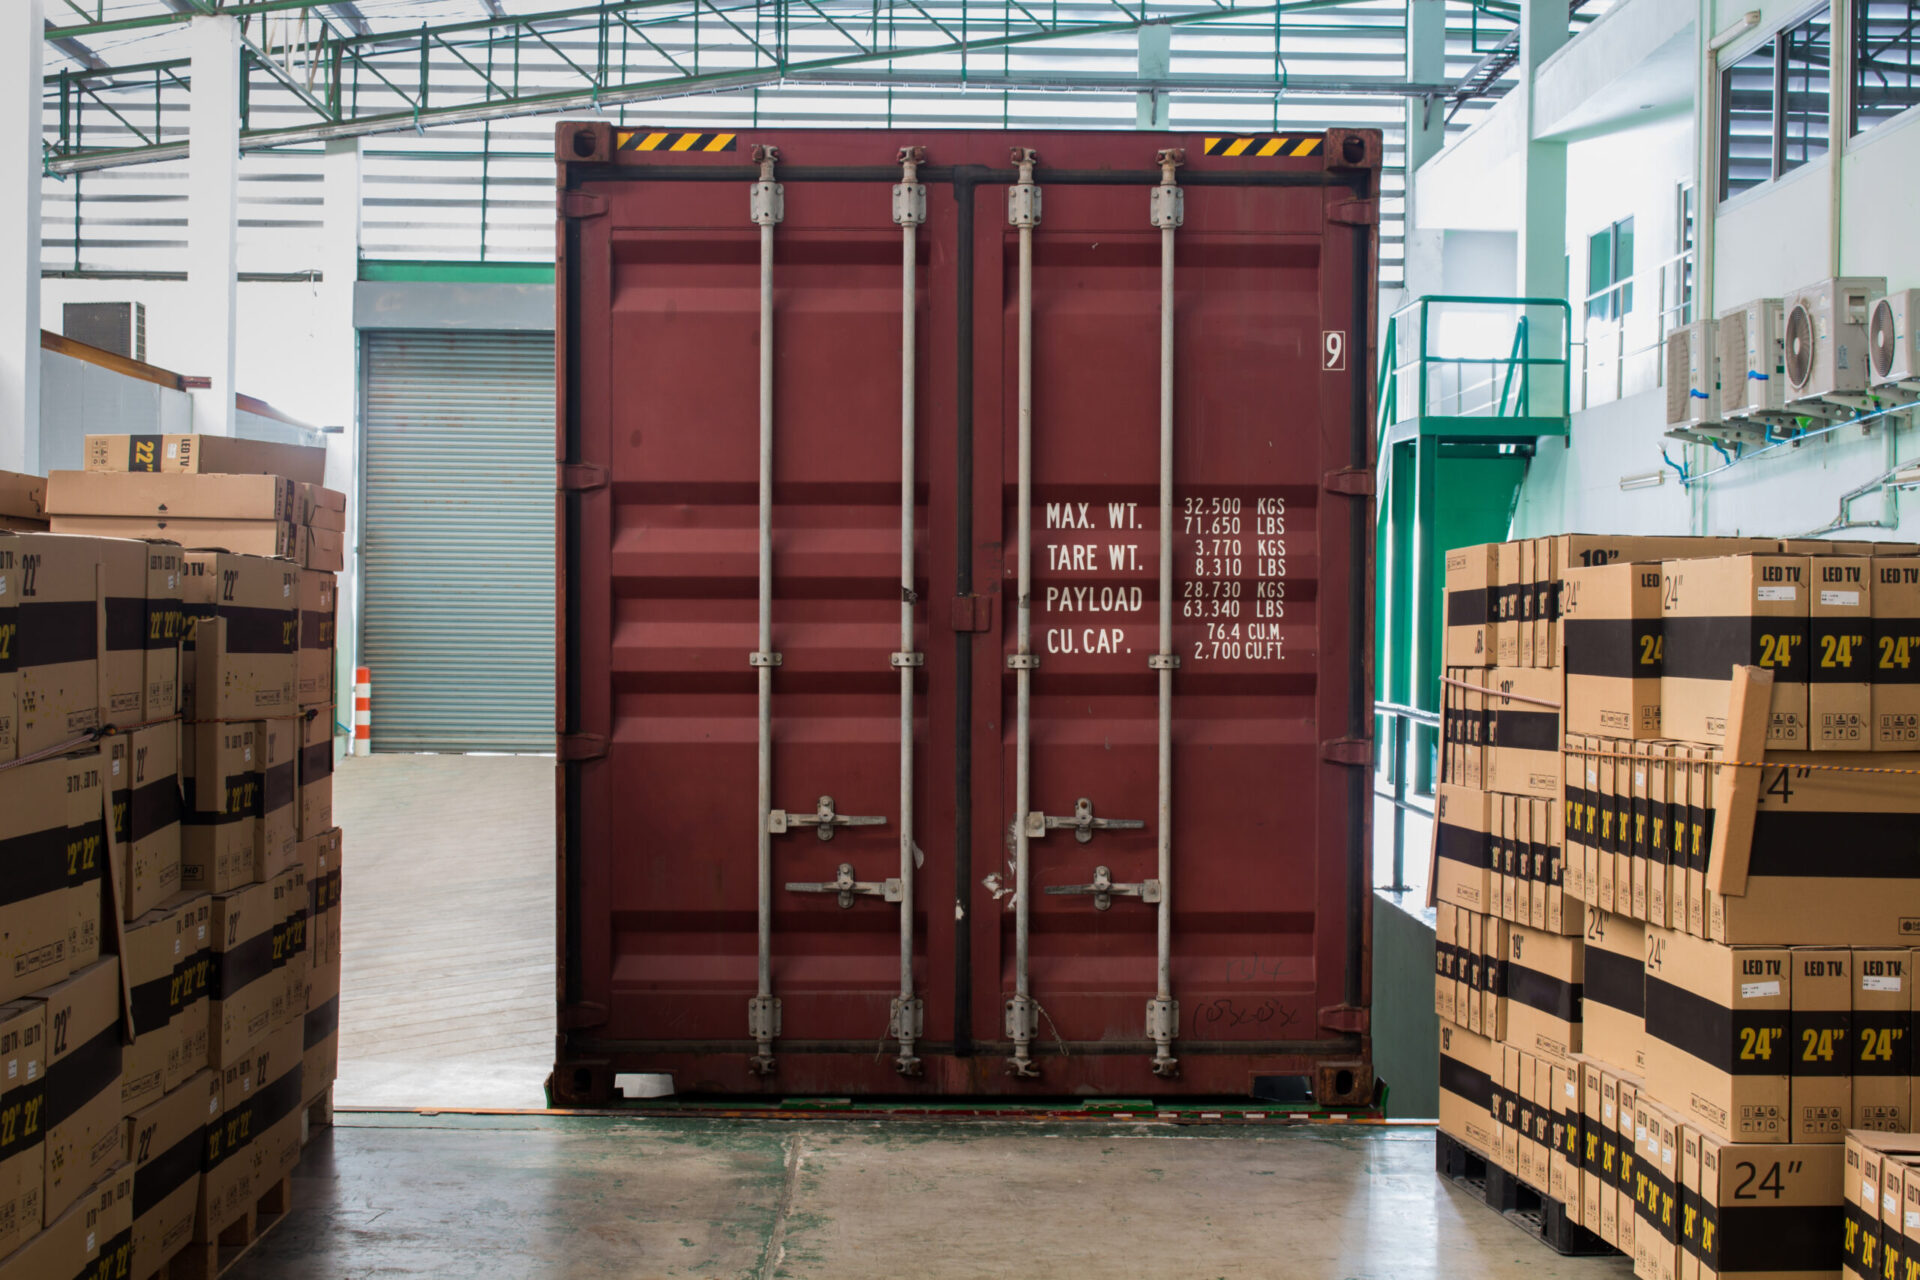 The container inside warehouse on shipment area for LCL consolidation.